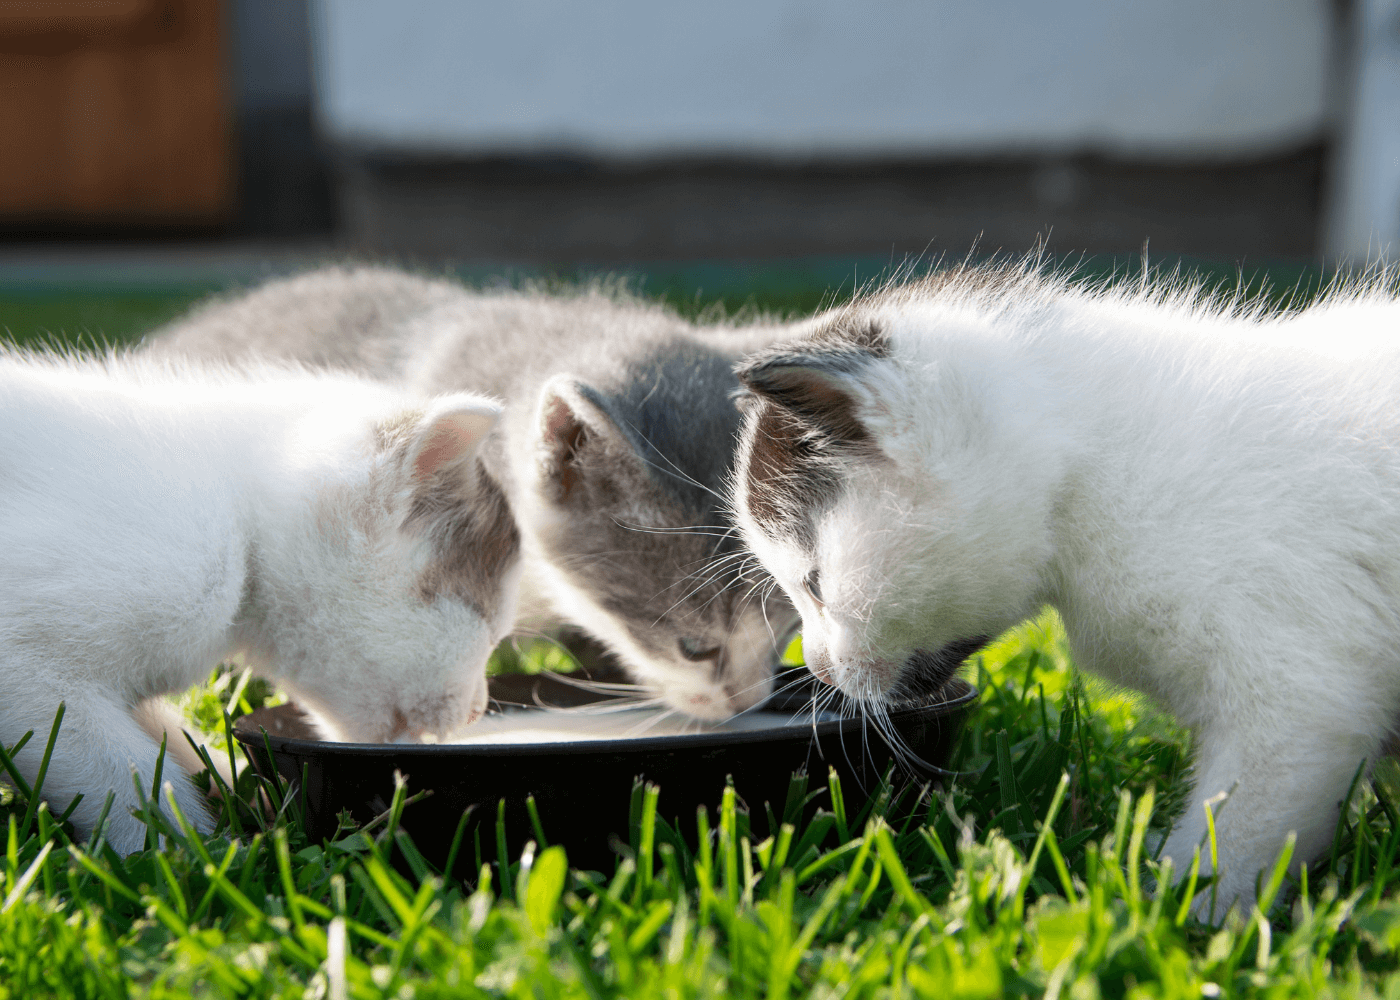 Kittens Drinking from a Bowl